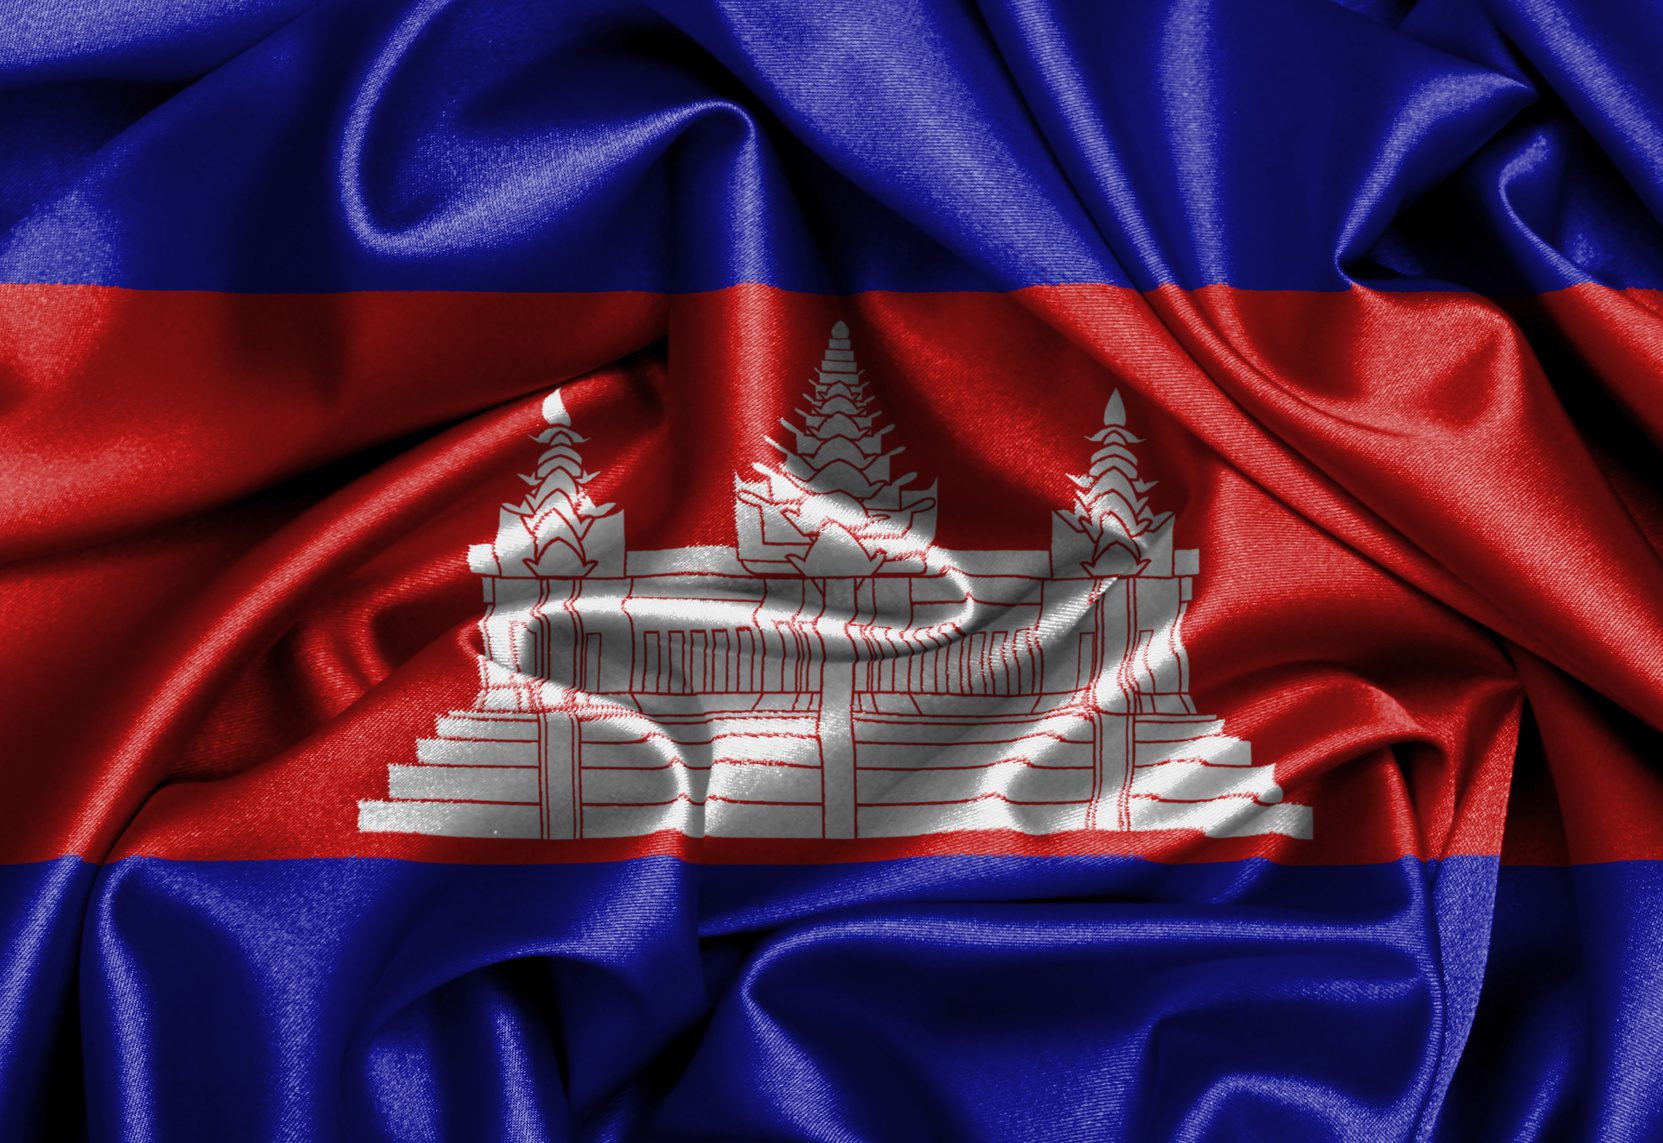 Is Cambodia Ready To Dress Up The World?